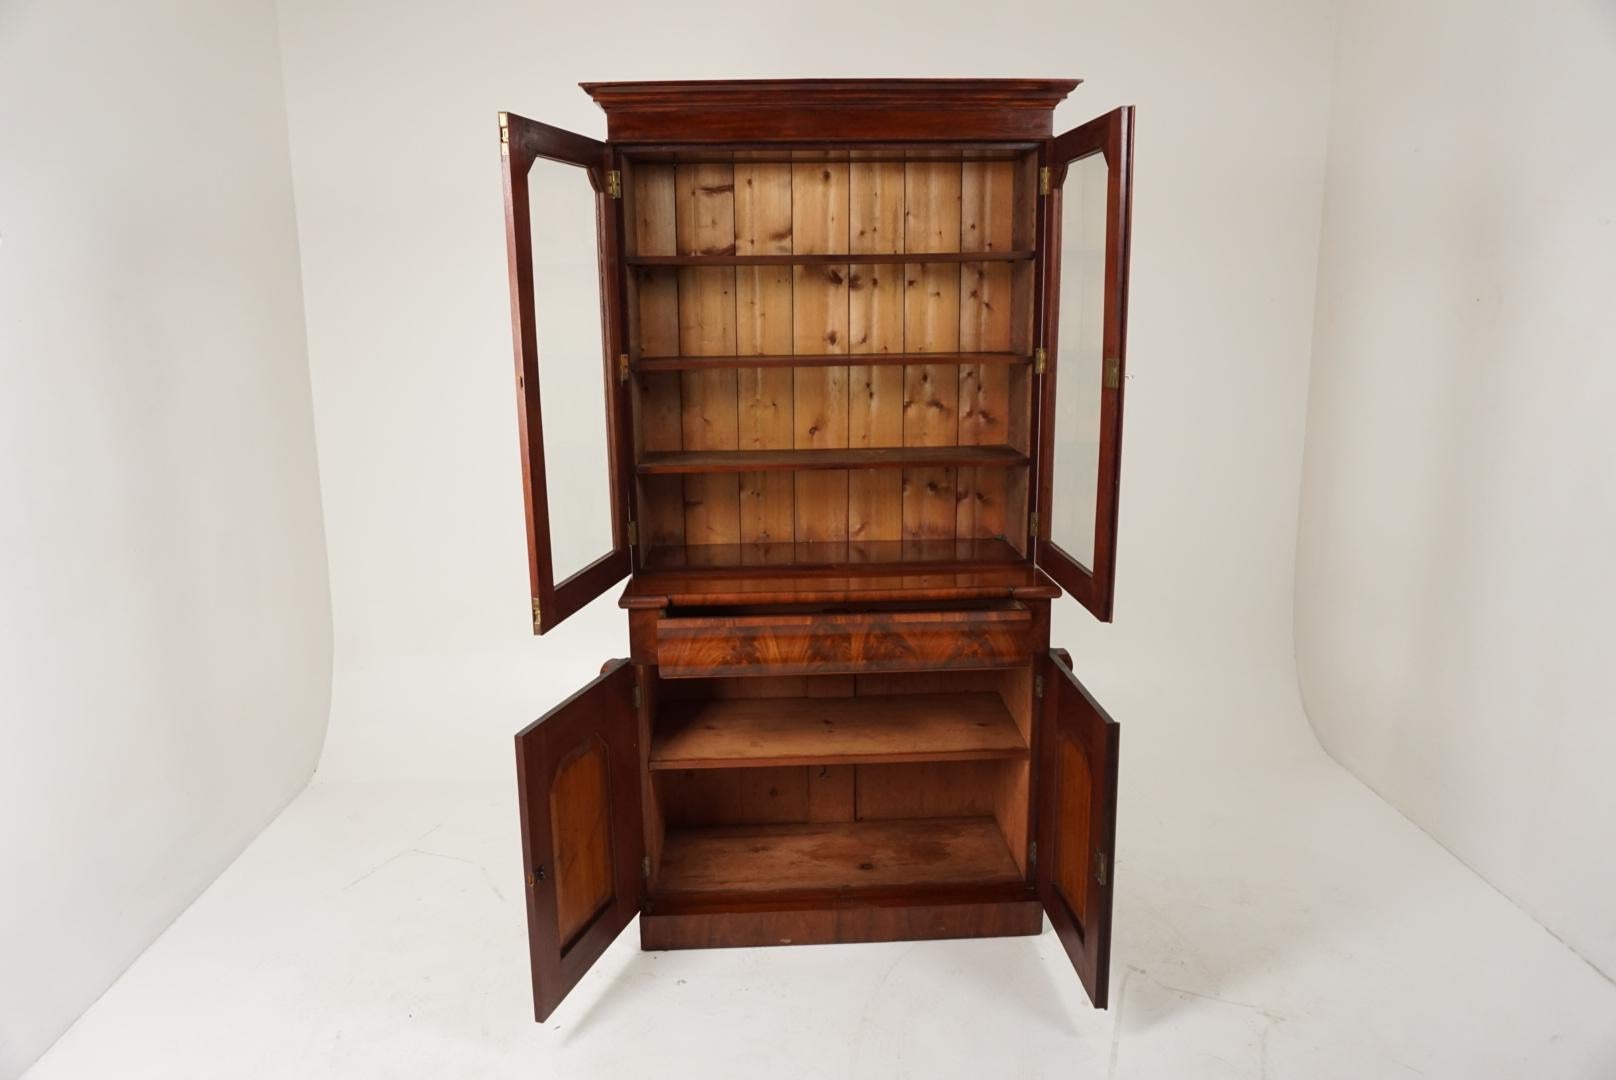 Antique Victorian walnut 4-door cabinet bookcase, Scotland 1875, B1837

Scotland, 1875
Solid walnut
Original finish
Flared cornice
Pair of glass doors with molding to the front
Opens to reveal three adjustable shelves
Base has single dove